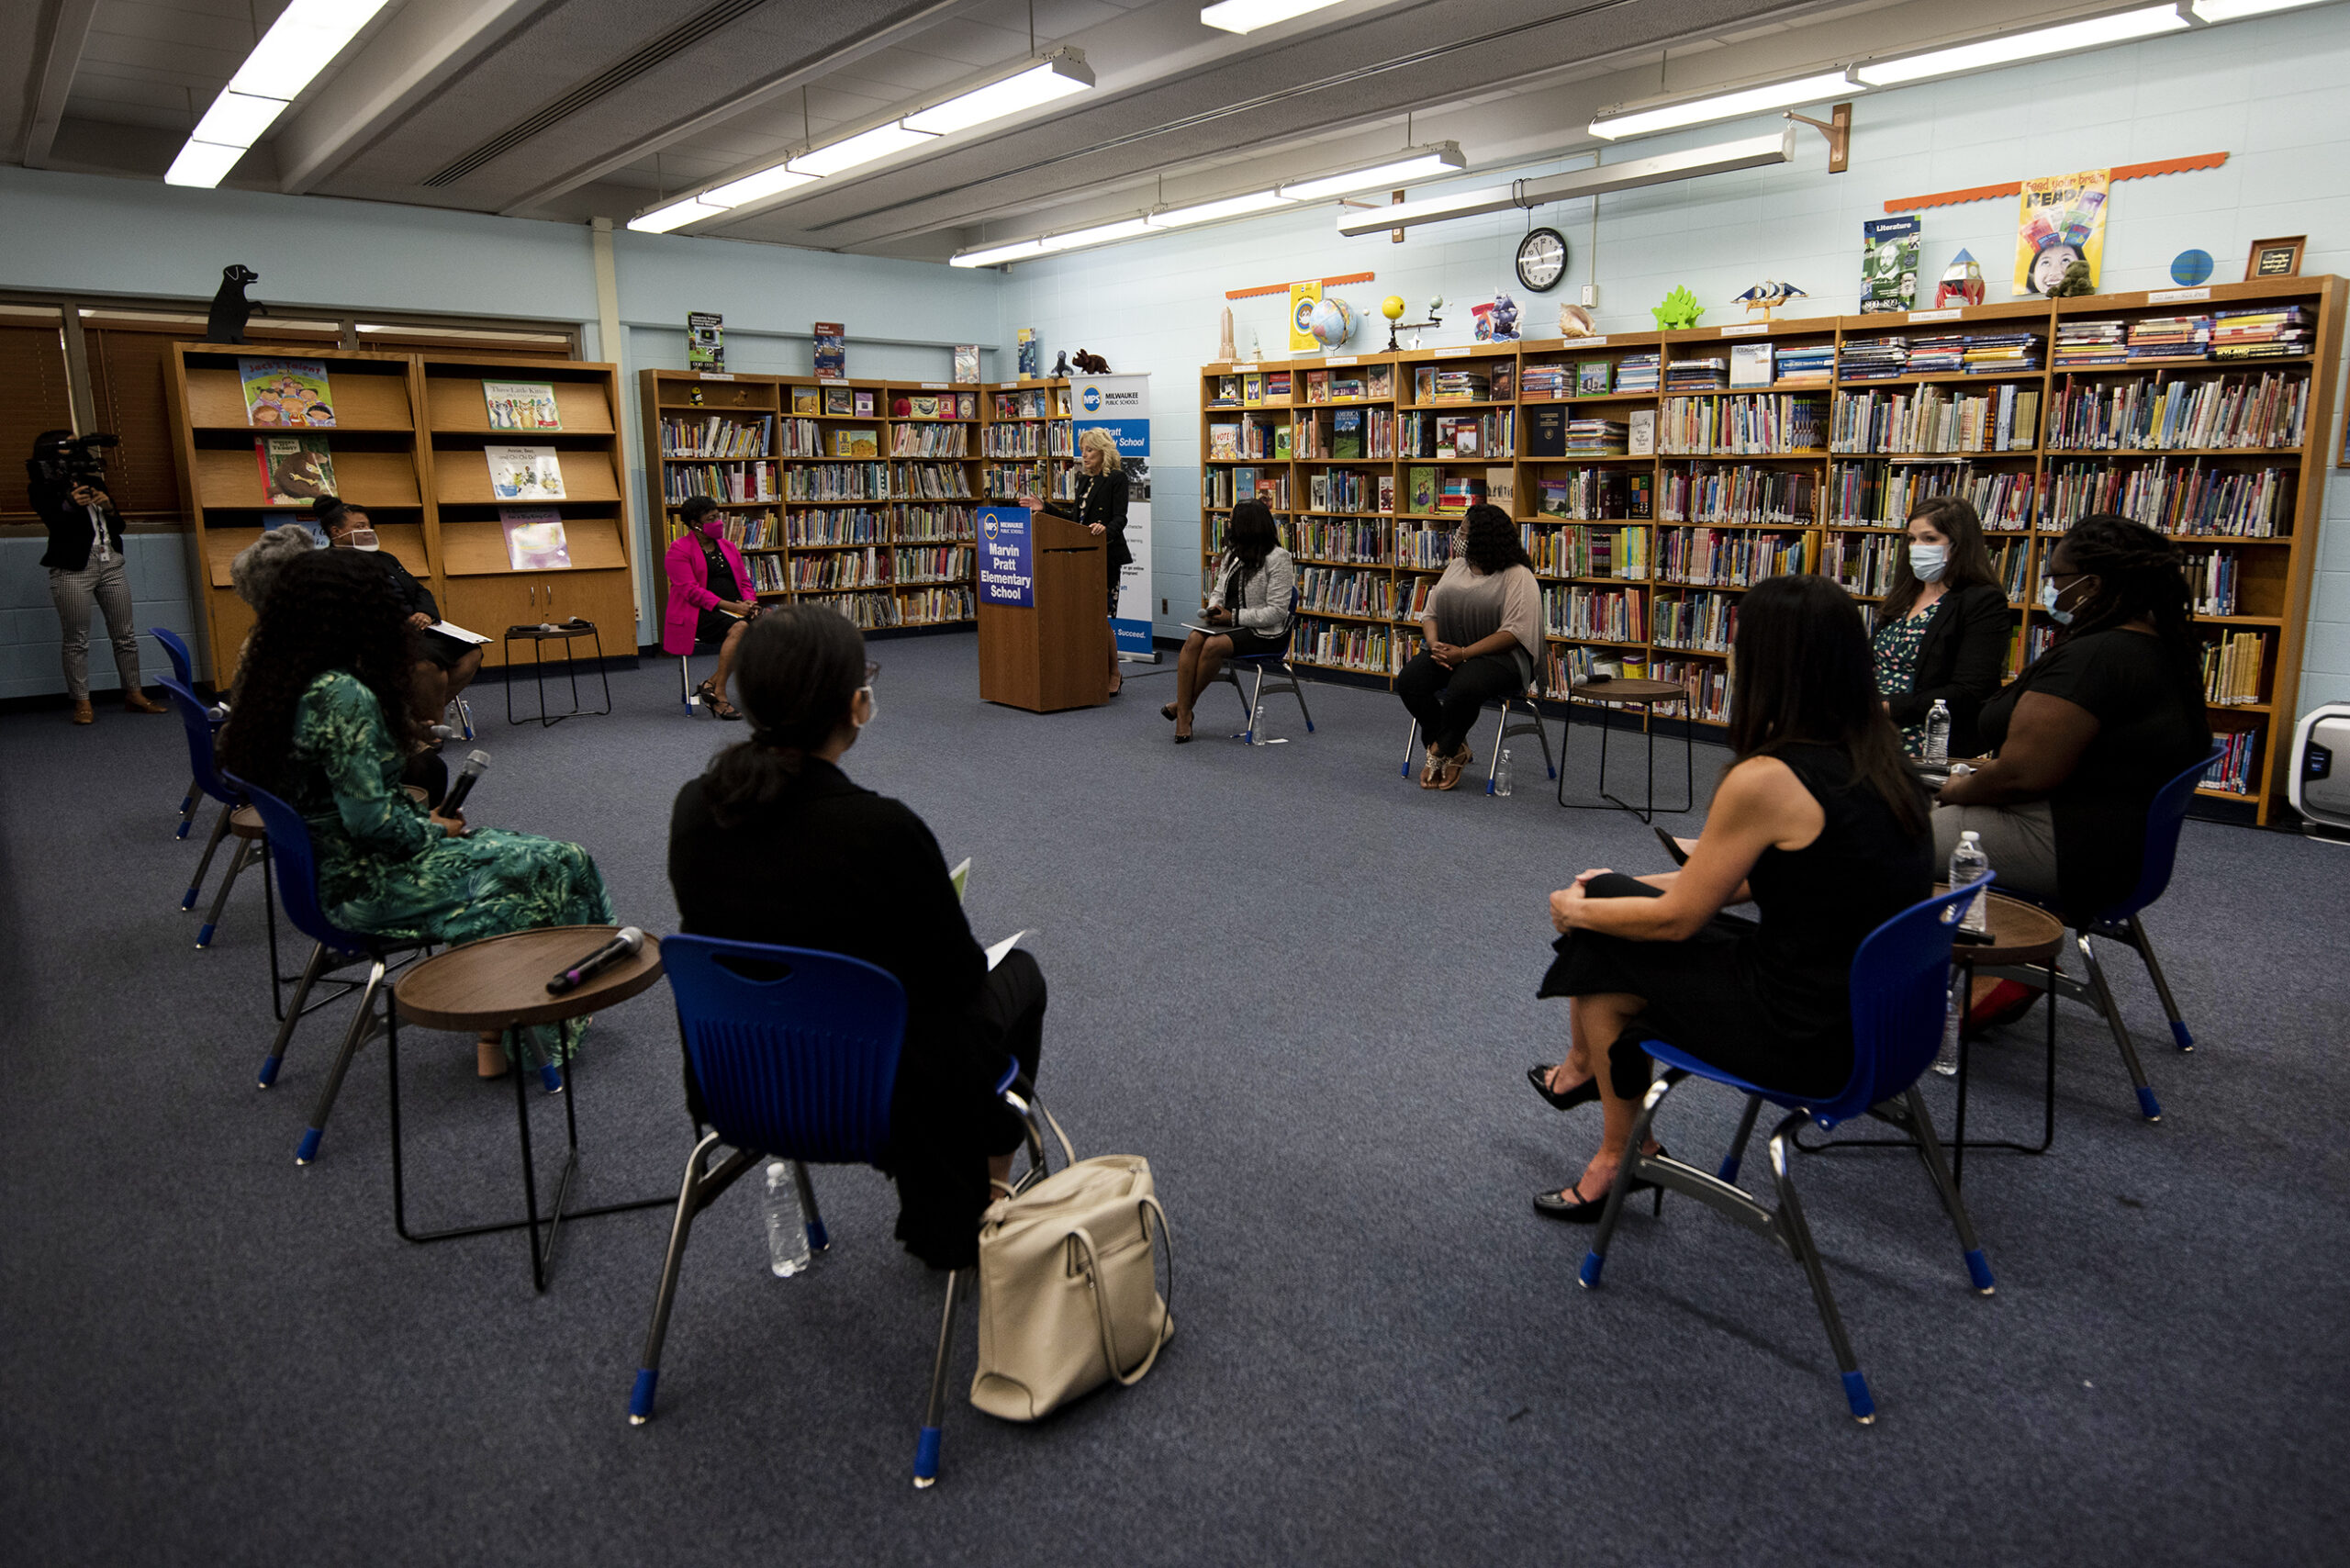 People sit facing each other in chairs inside of a school library.